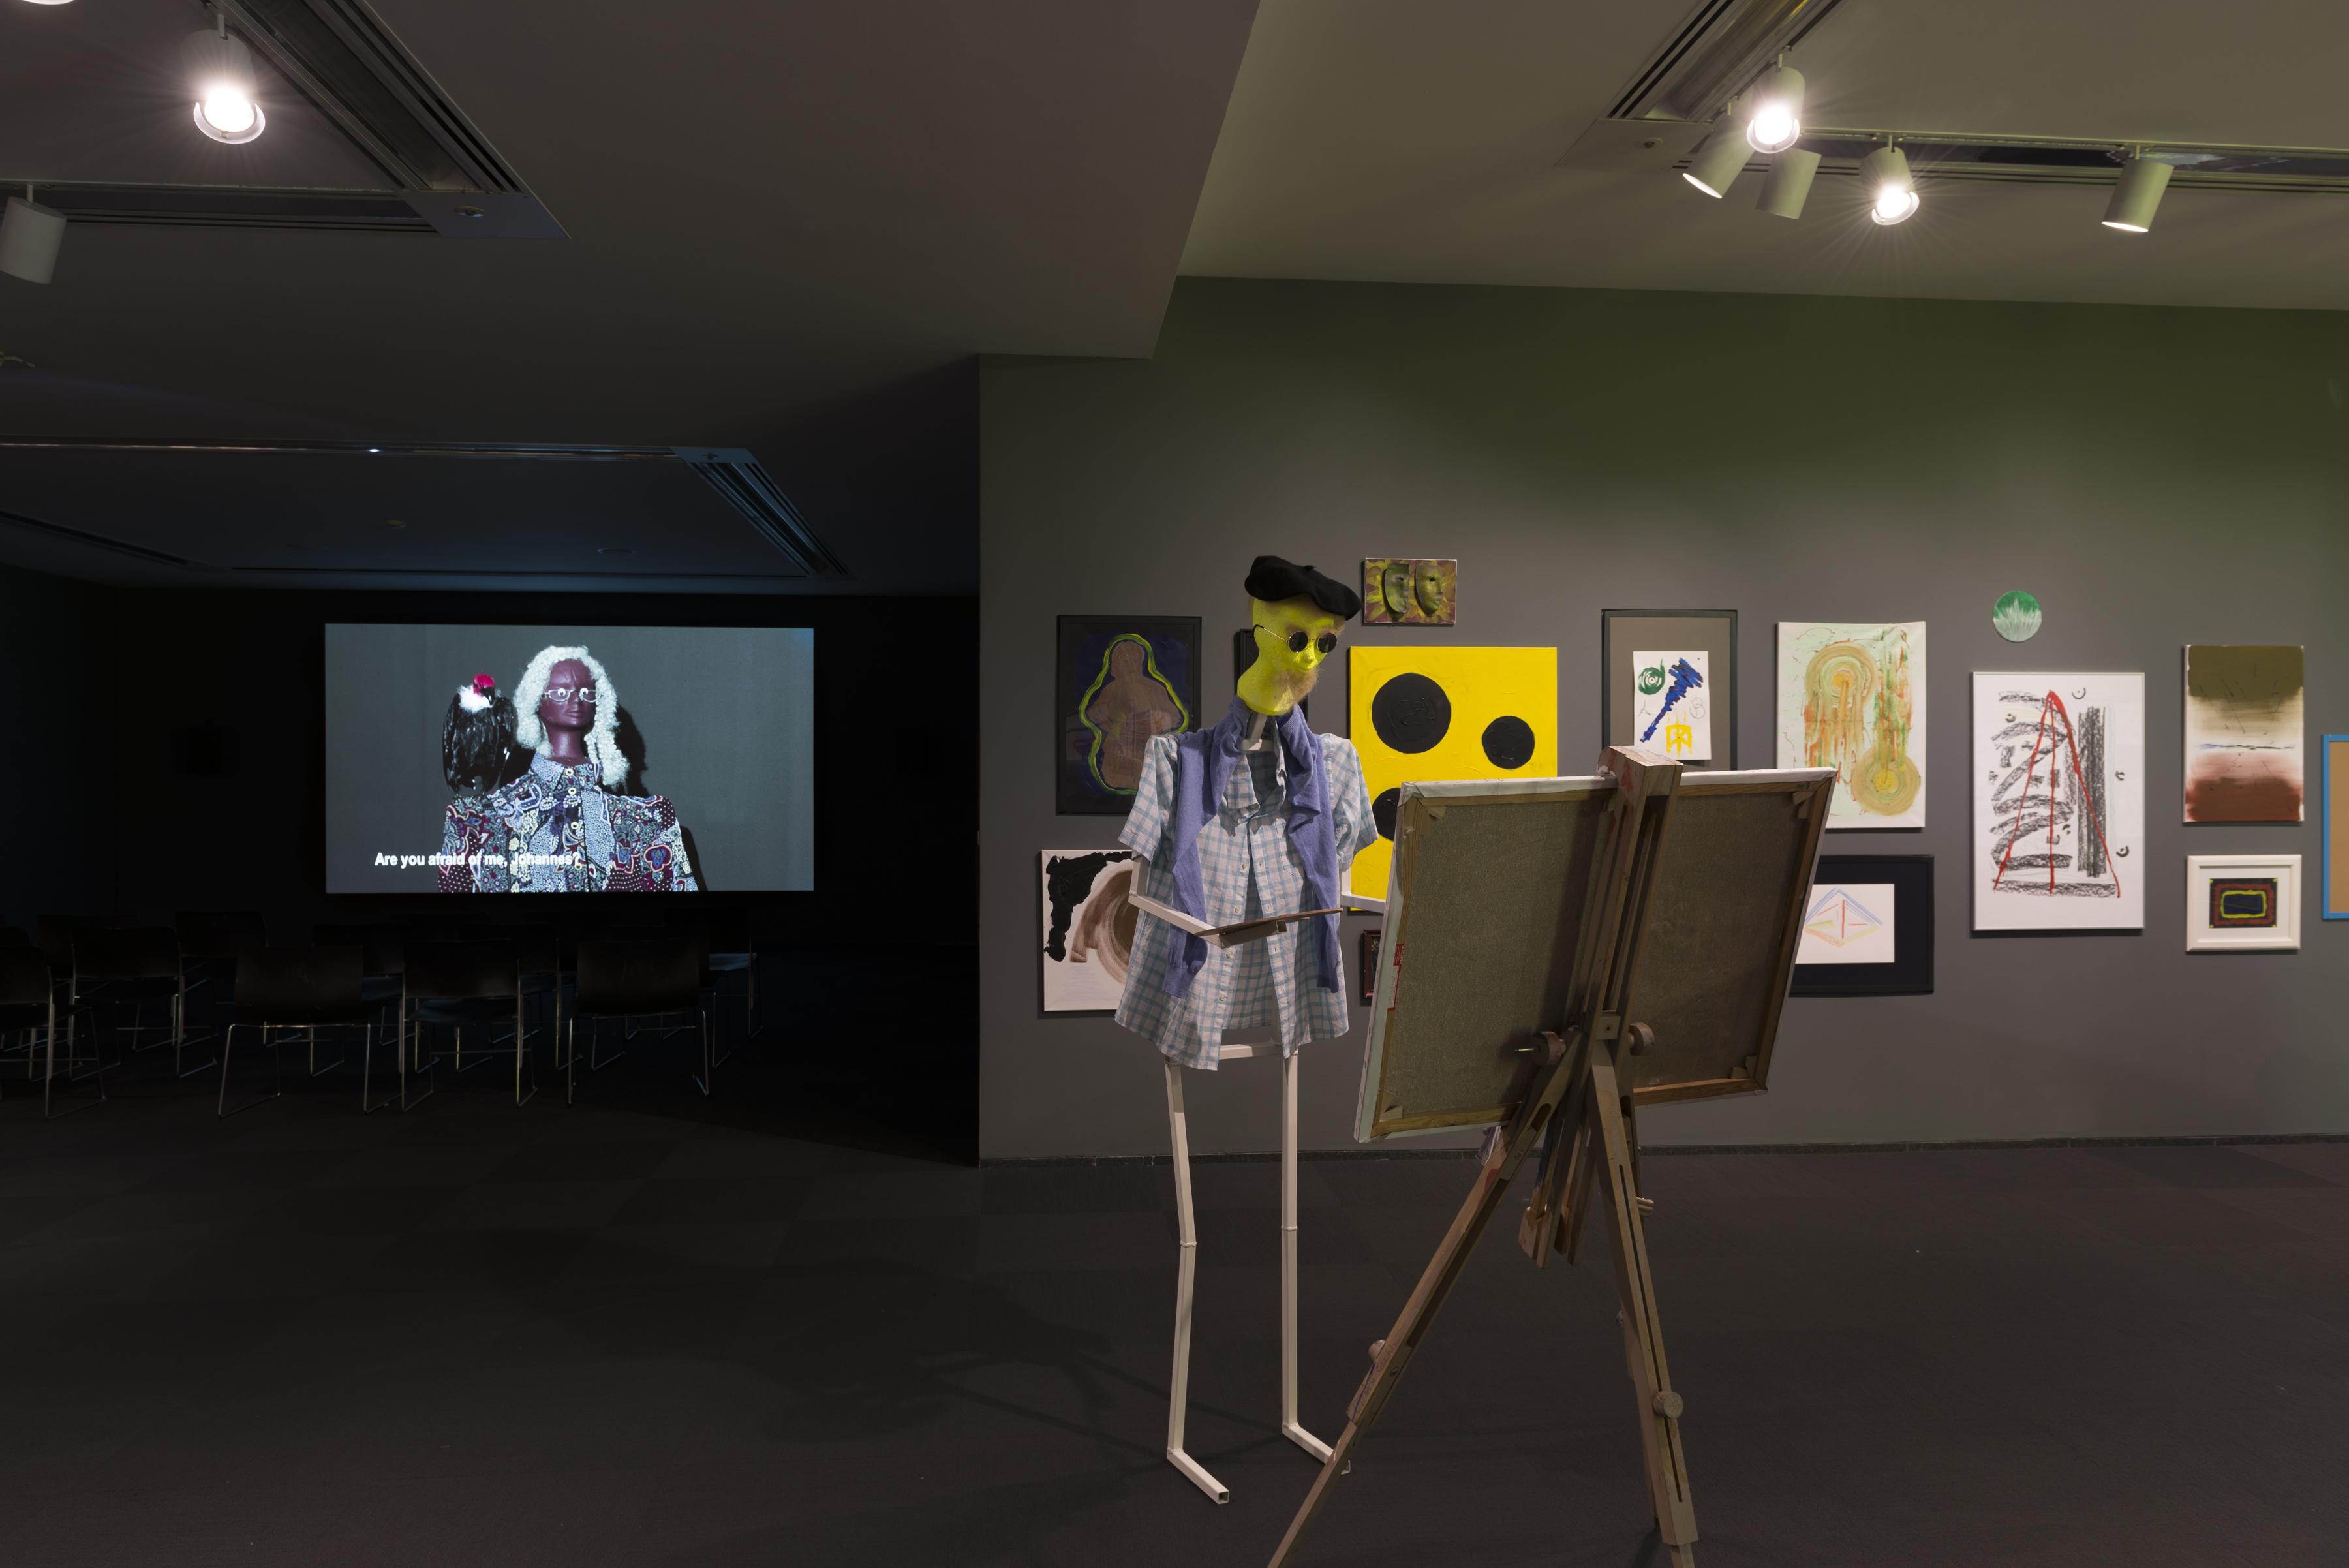 A humanoid figure wearing a beret and plaid shirt stands at an easel holding a paint palette. There are abstract paintings and a video projection of a human doll in the background.